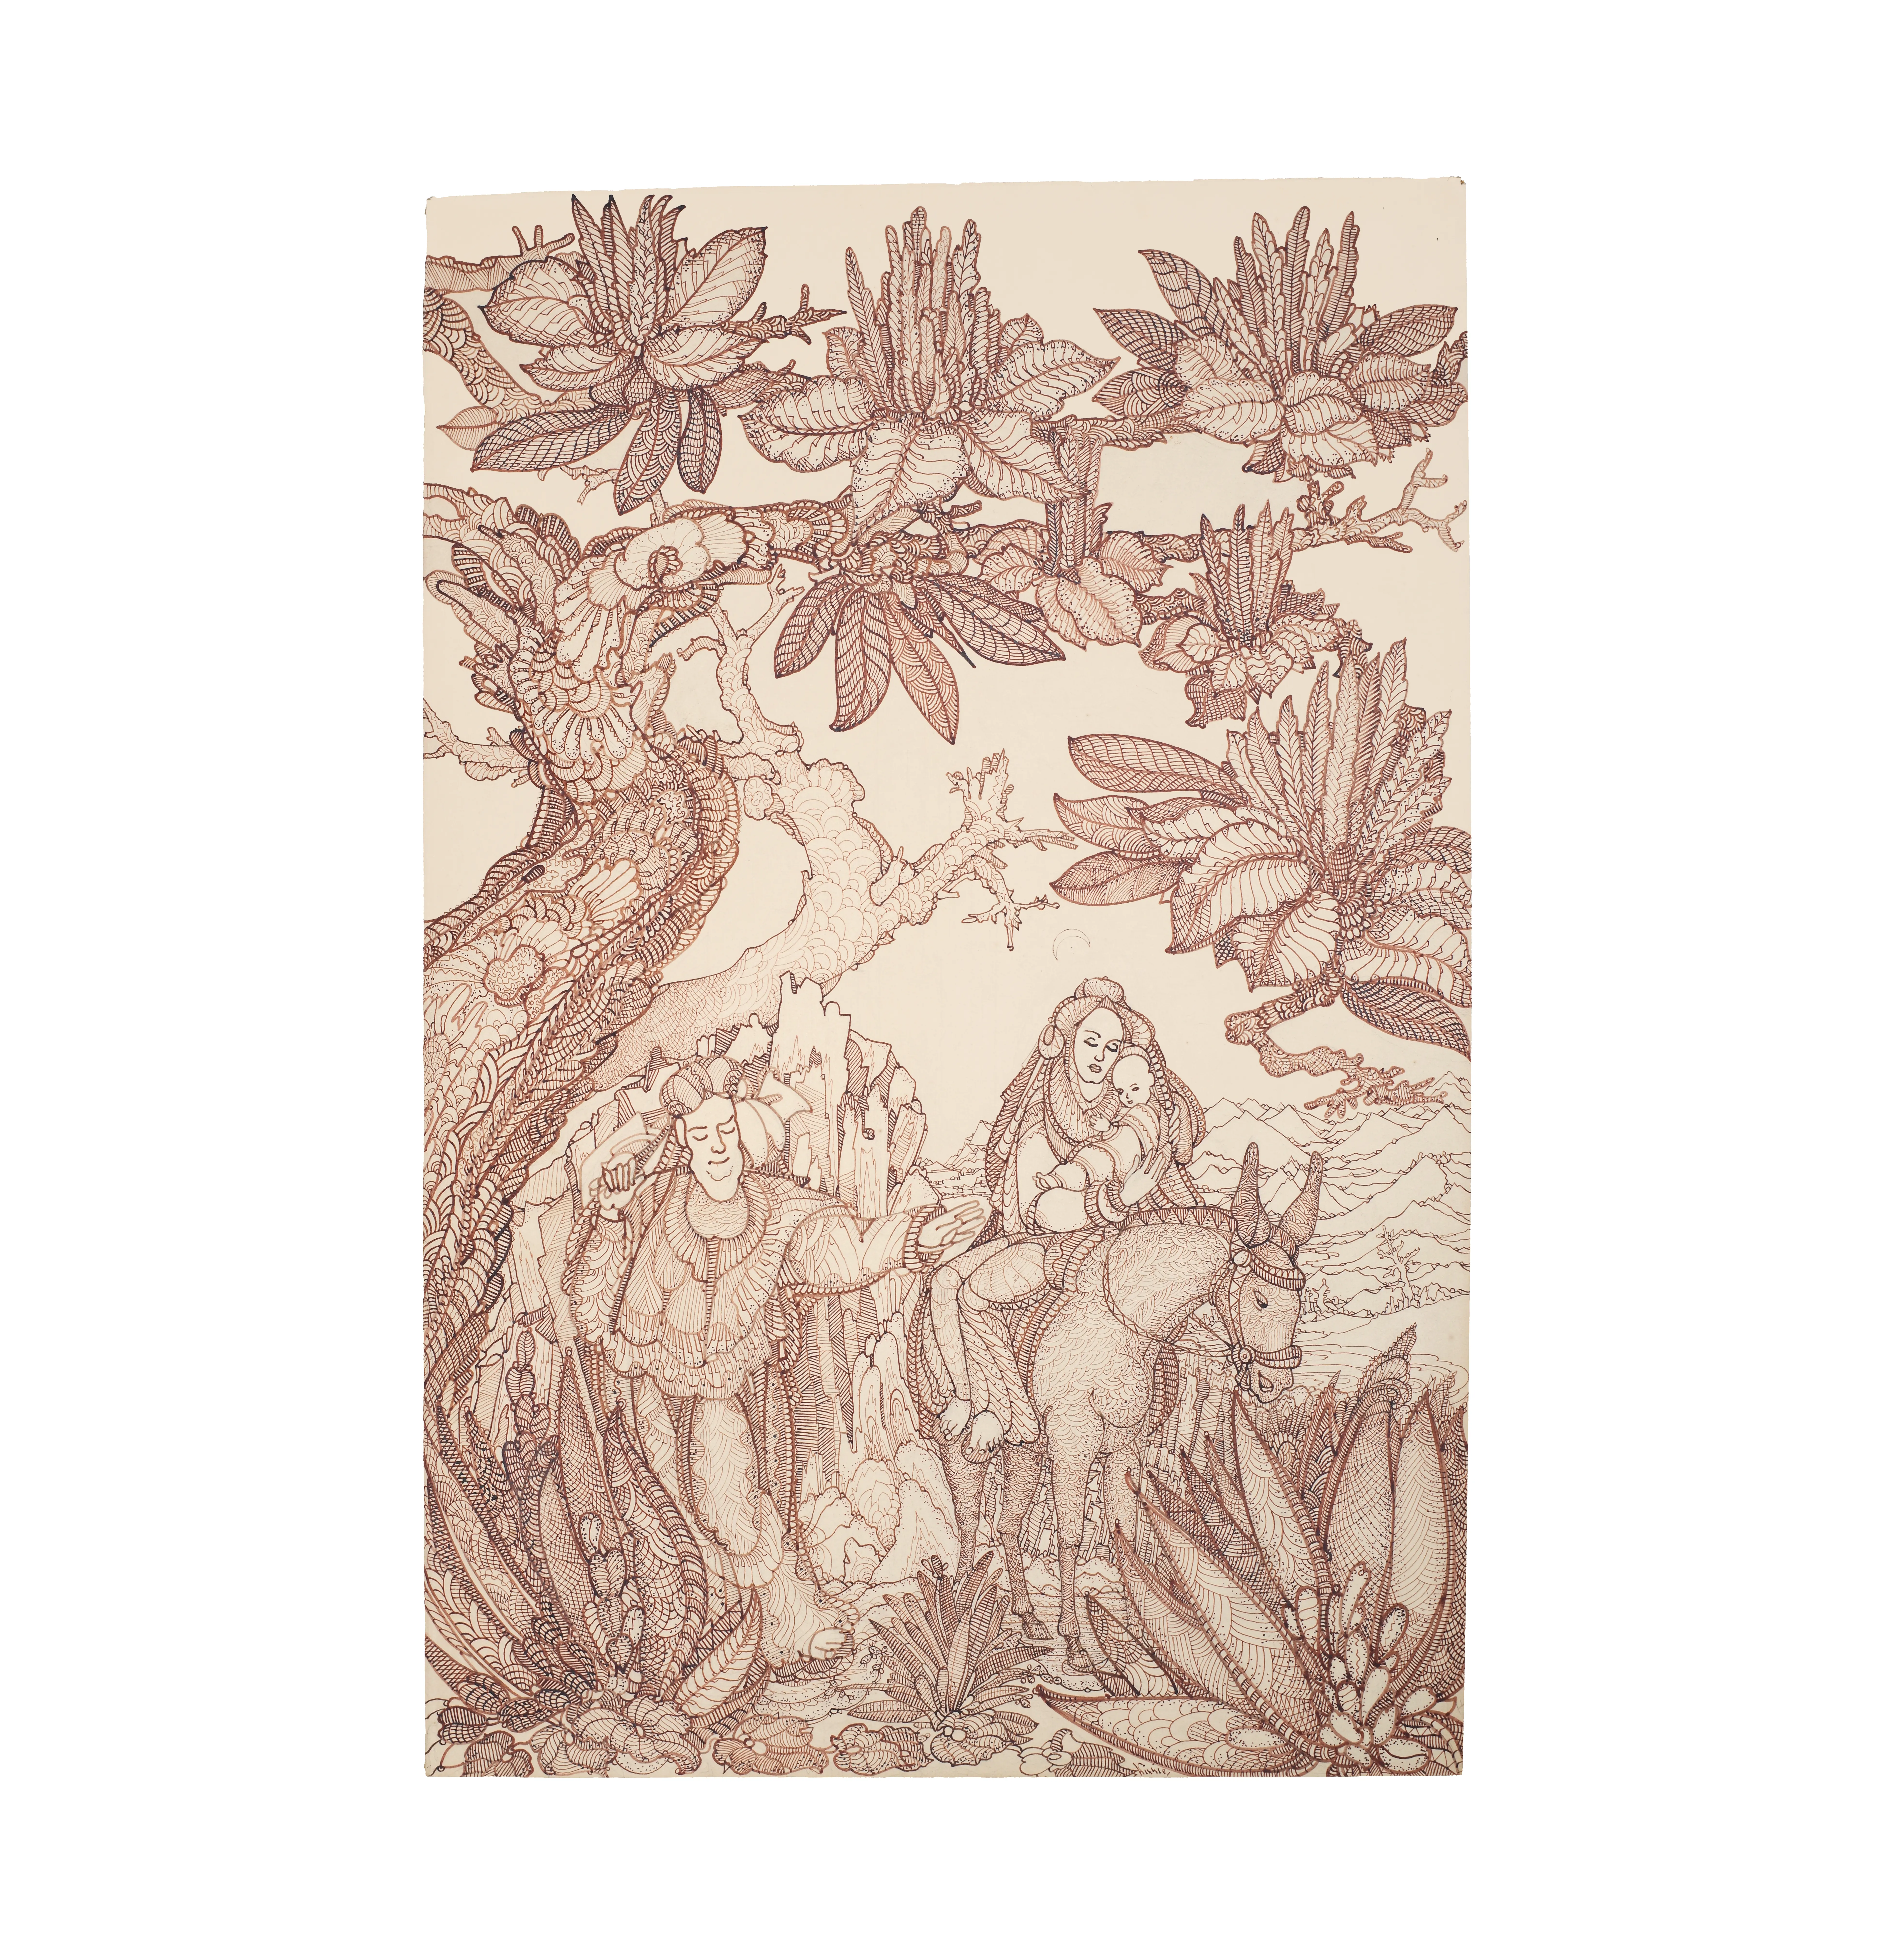 Vintage Queen King and Child In a Fantasy Forrest Mehndi Art Drawing